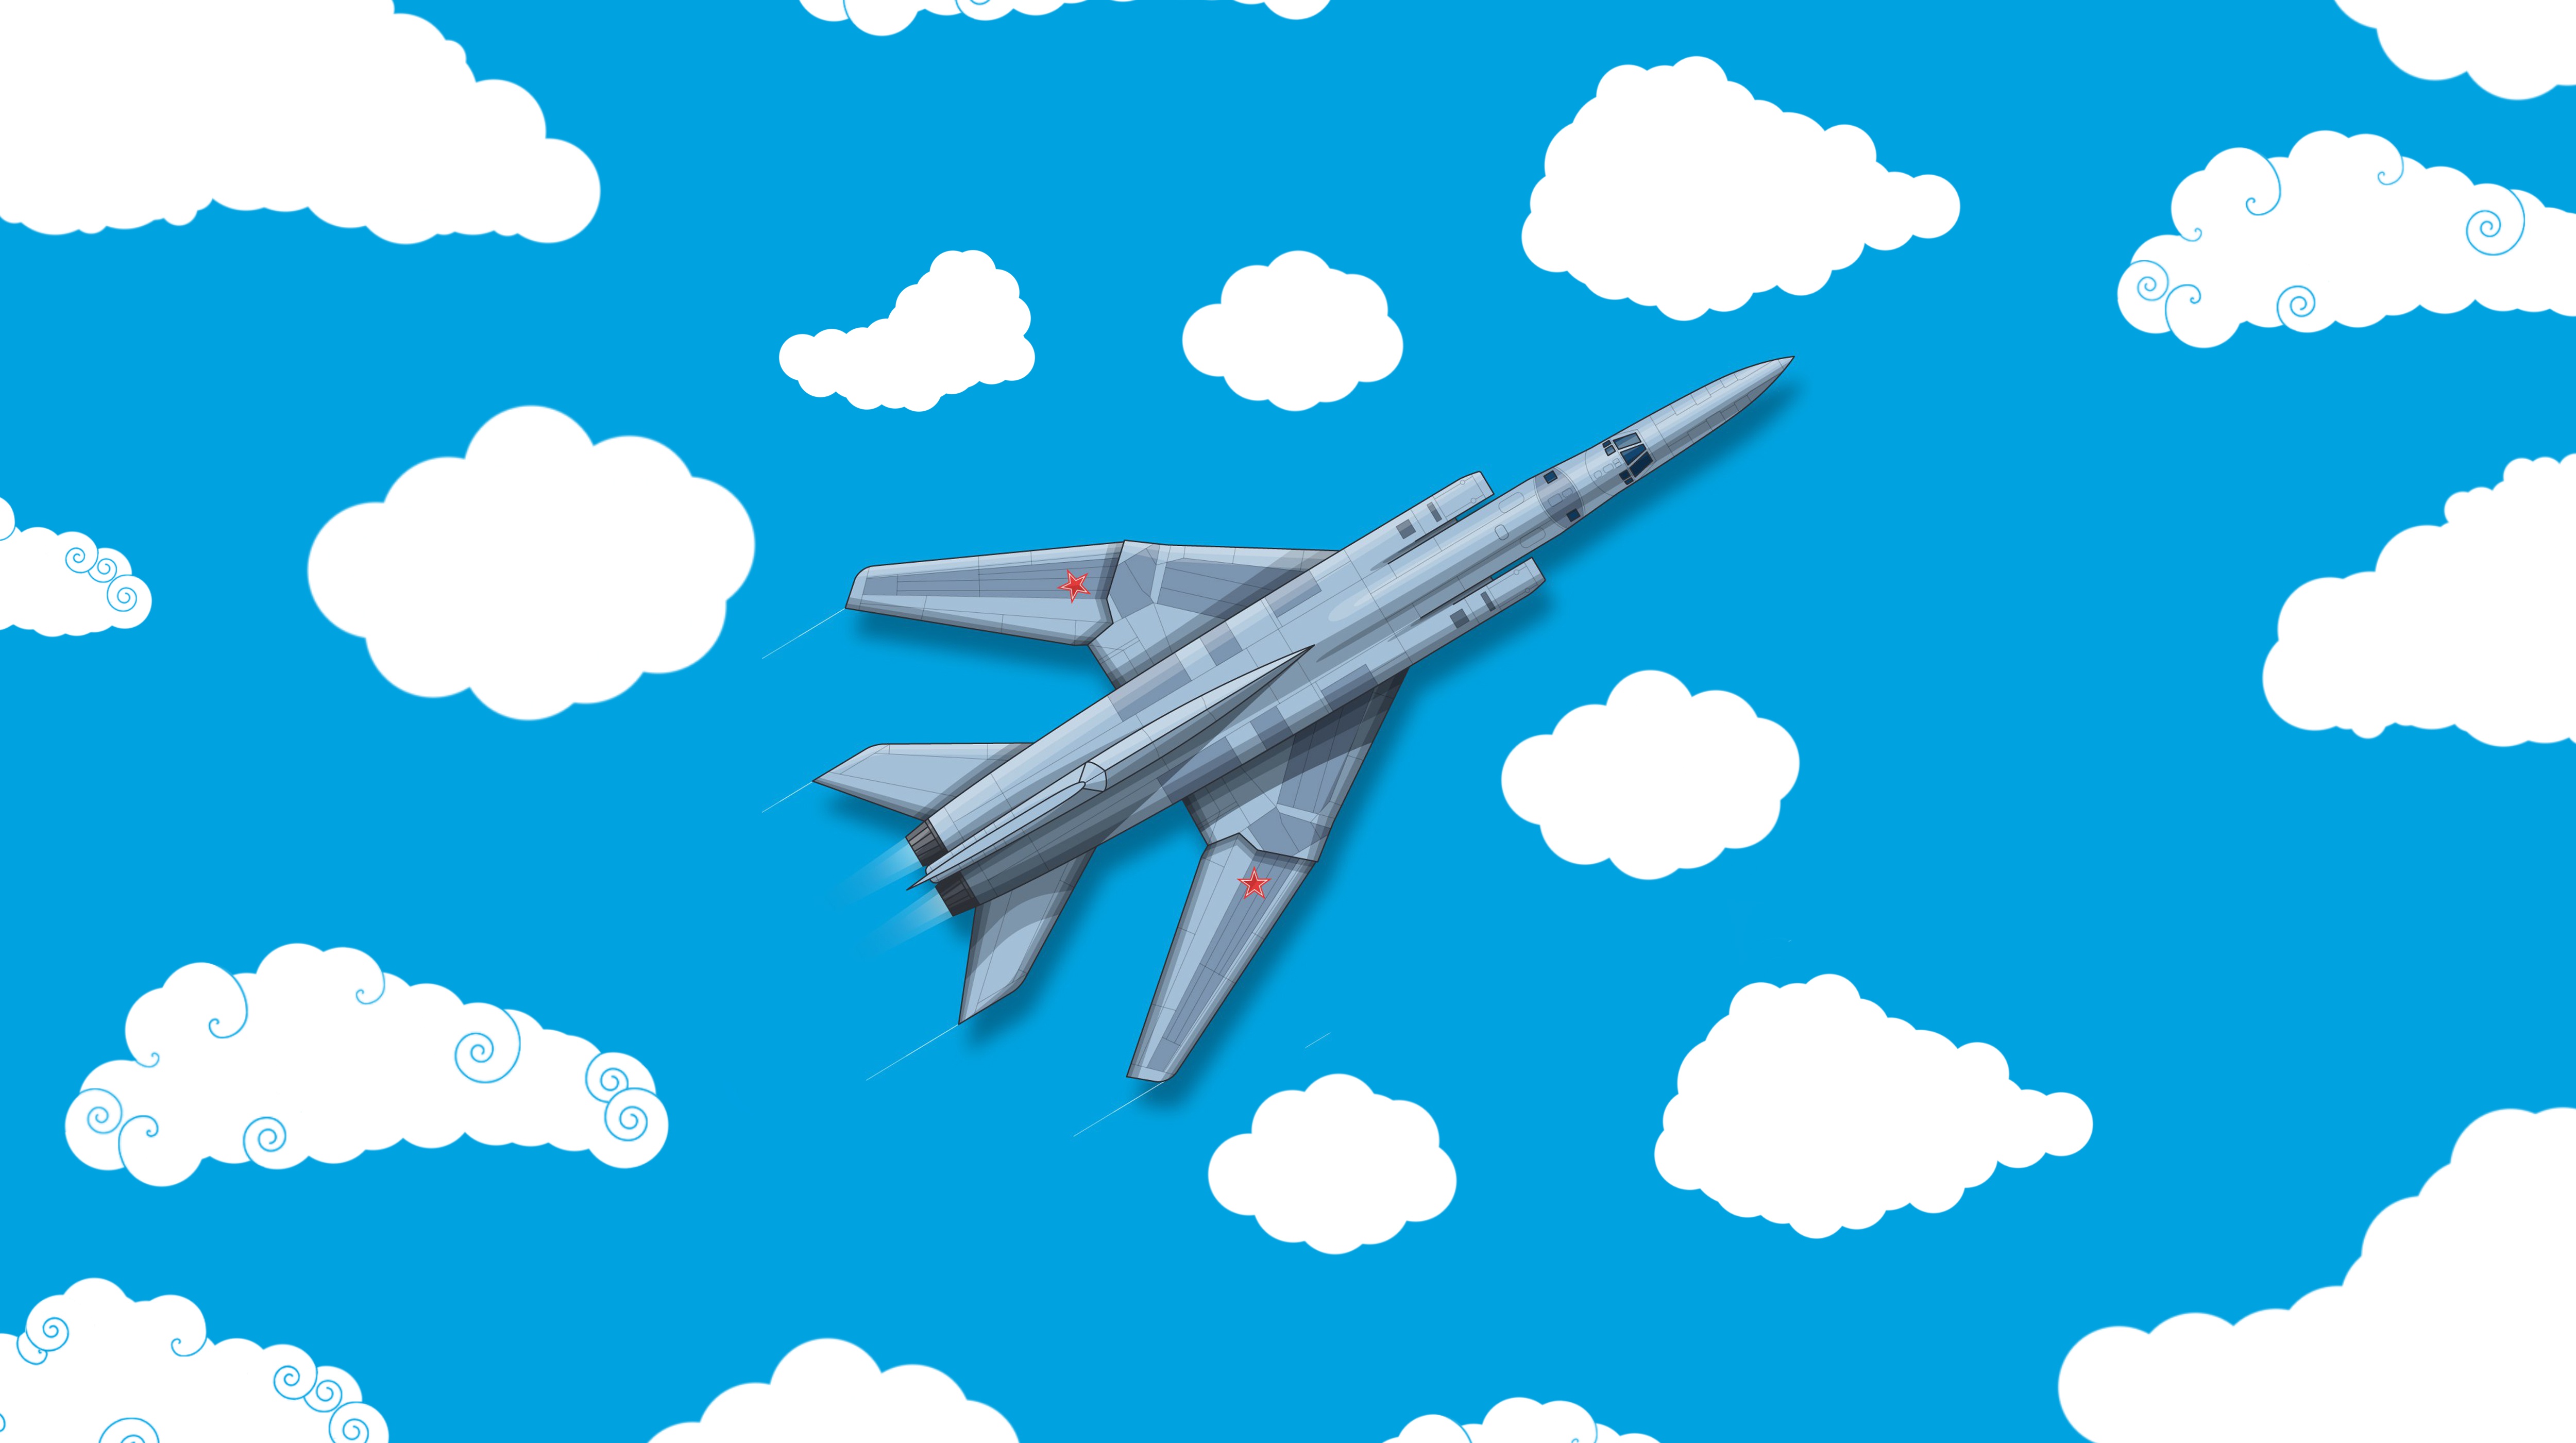 General 5000x2800 aircraft vehicle military aircraft artwork Tupolev Tu-22M3 sky clouds simple background Supersonic Bomber jets airplane Bomber Russian Air Force red star